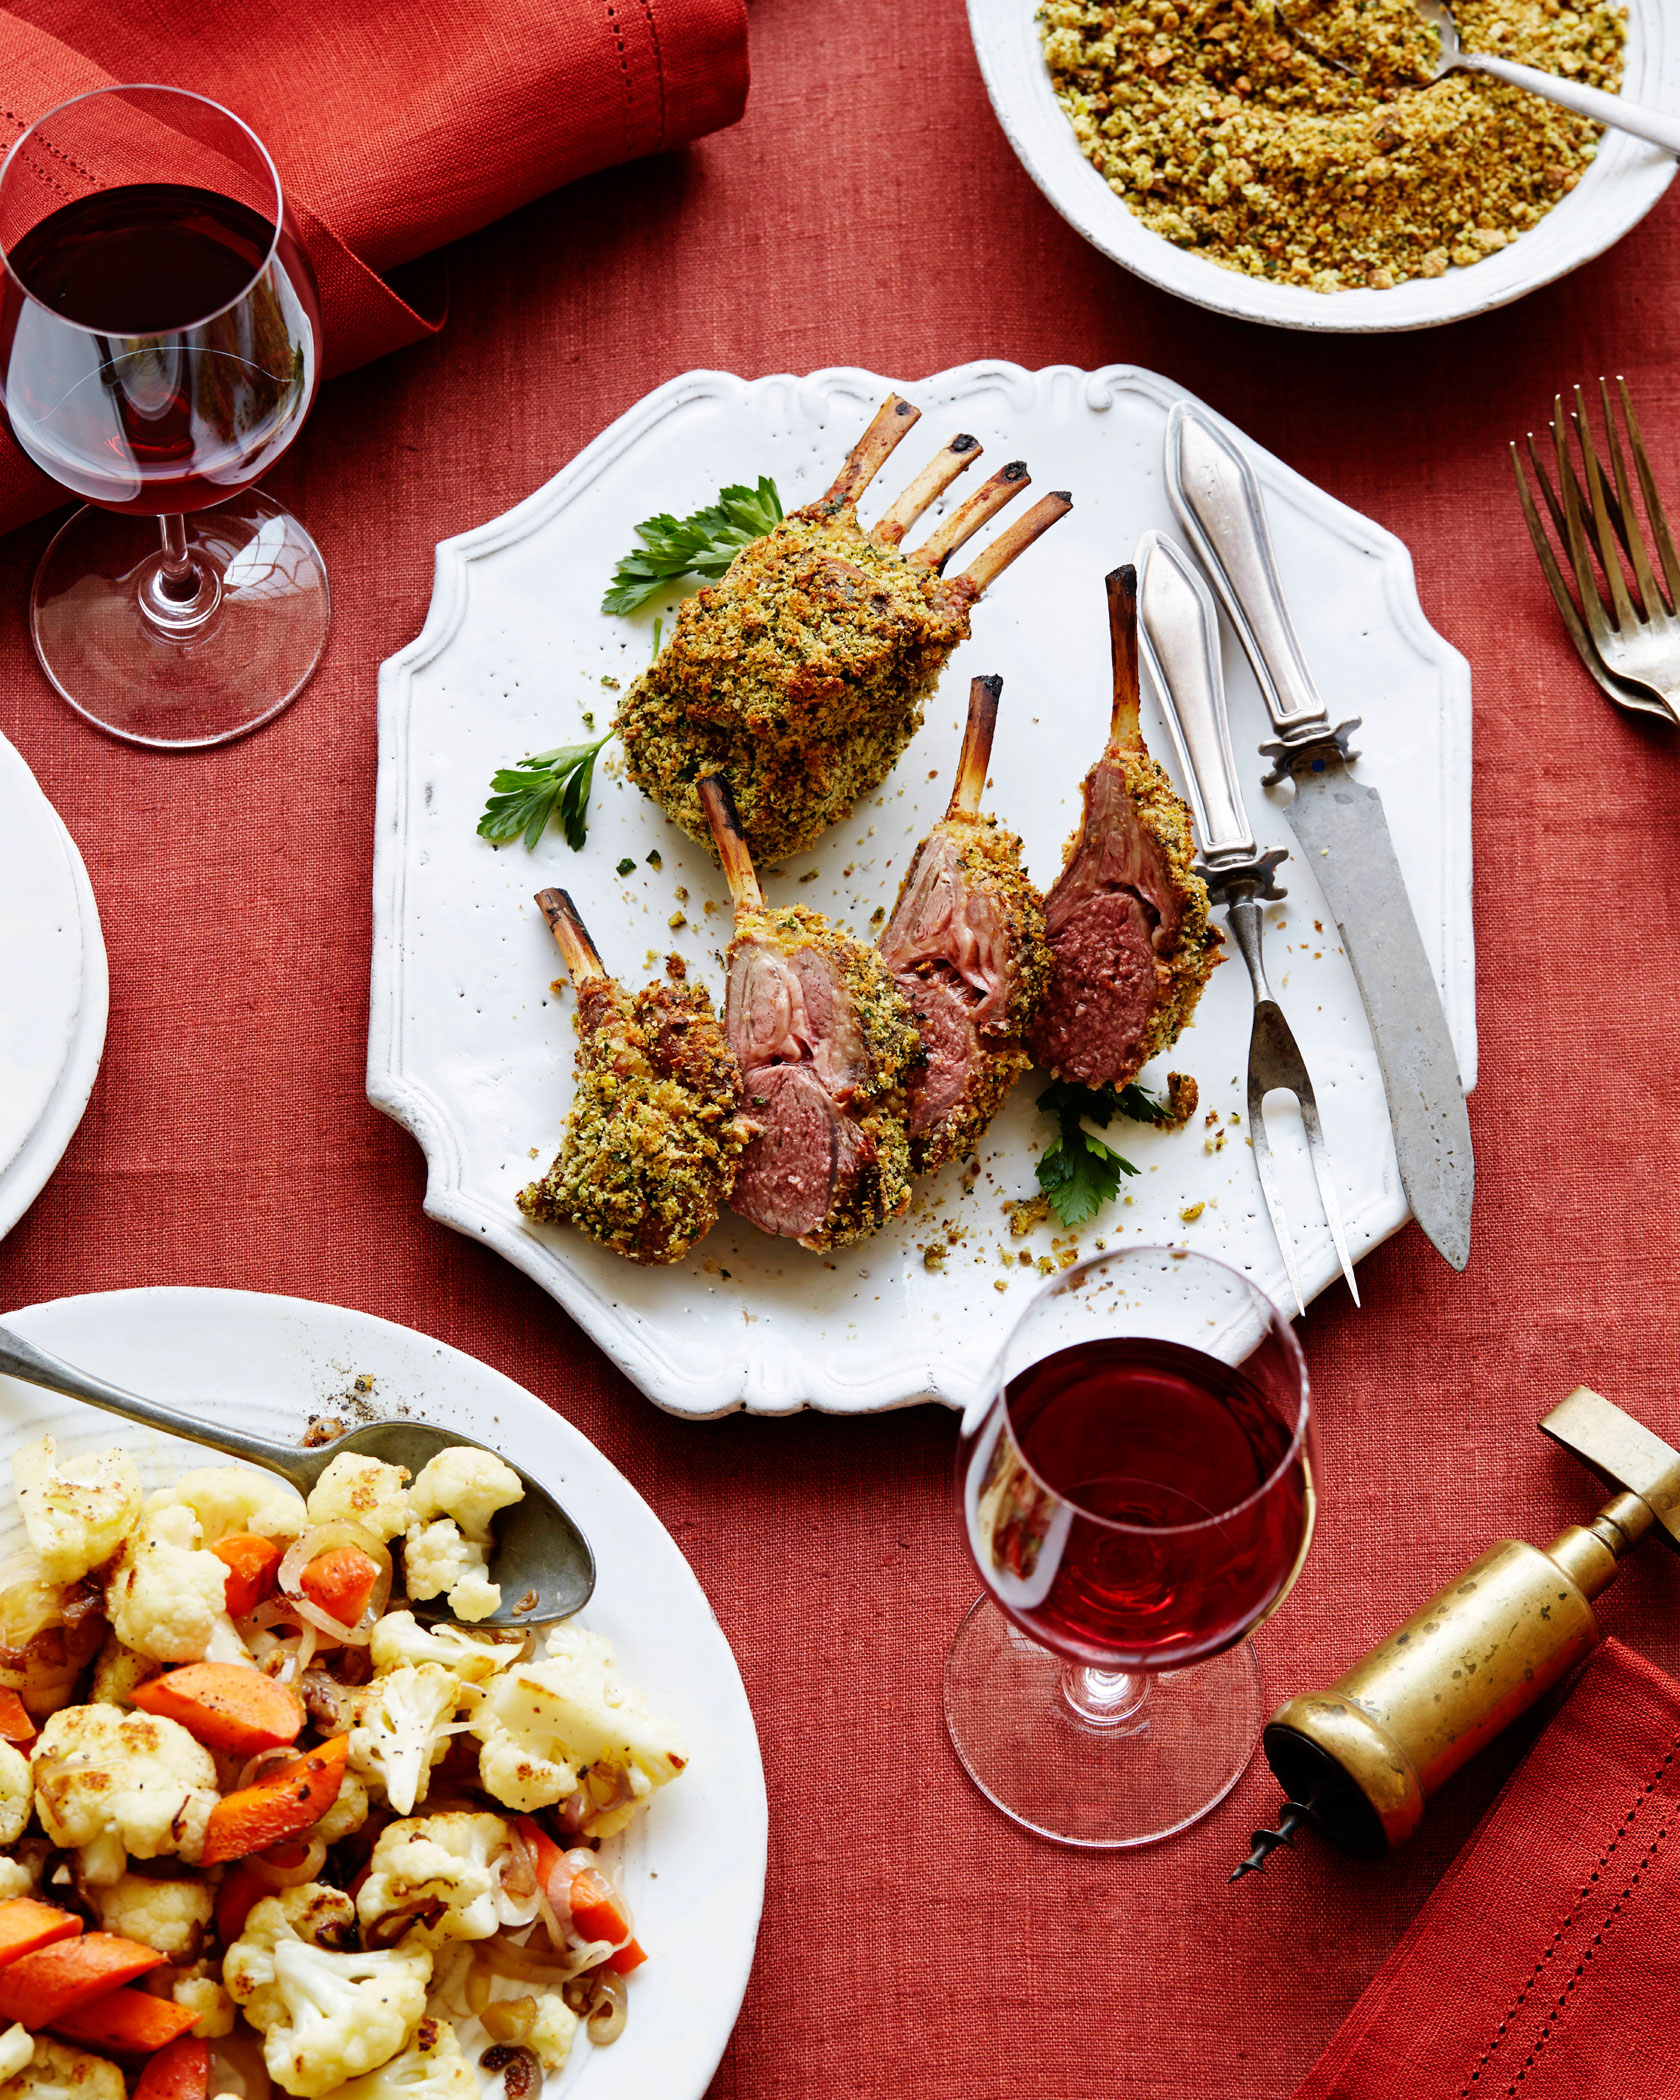 Herb and Pistachio Crusted Rack of Lamb with Caramelized Cauliflower, Shallots and Carrots